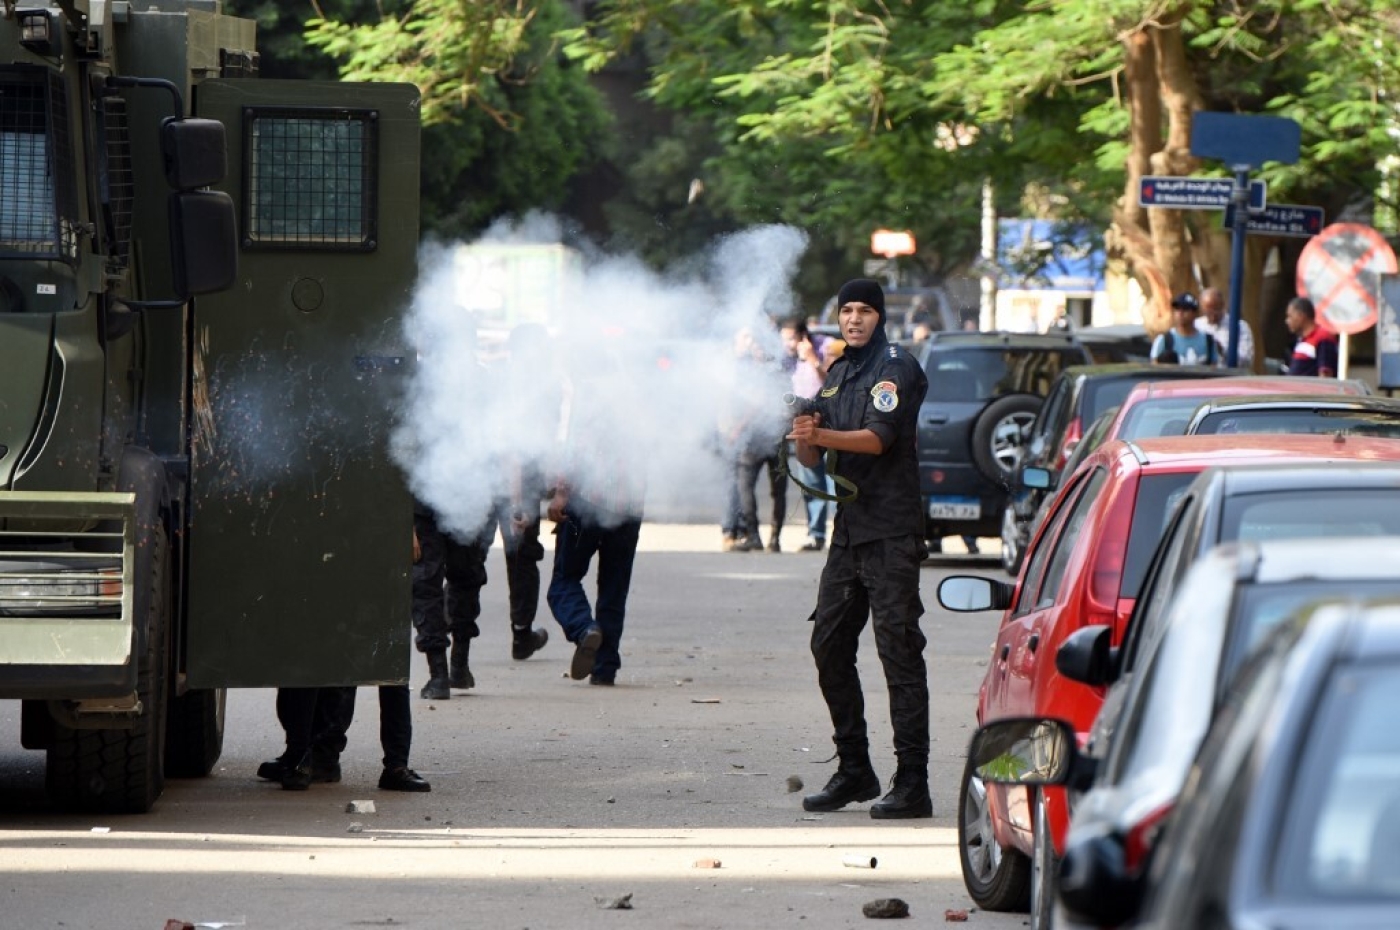 Egypt: At least one protester killed in anti-Sisi protests, hundreds  detained | Middle East Eye